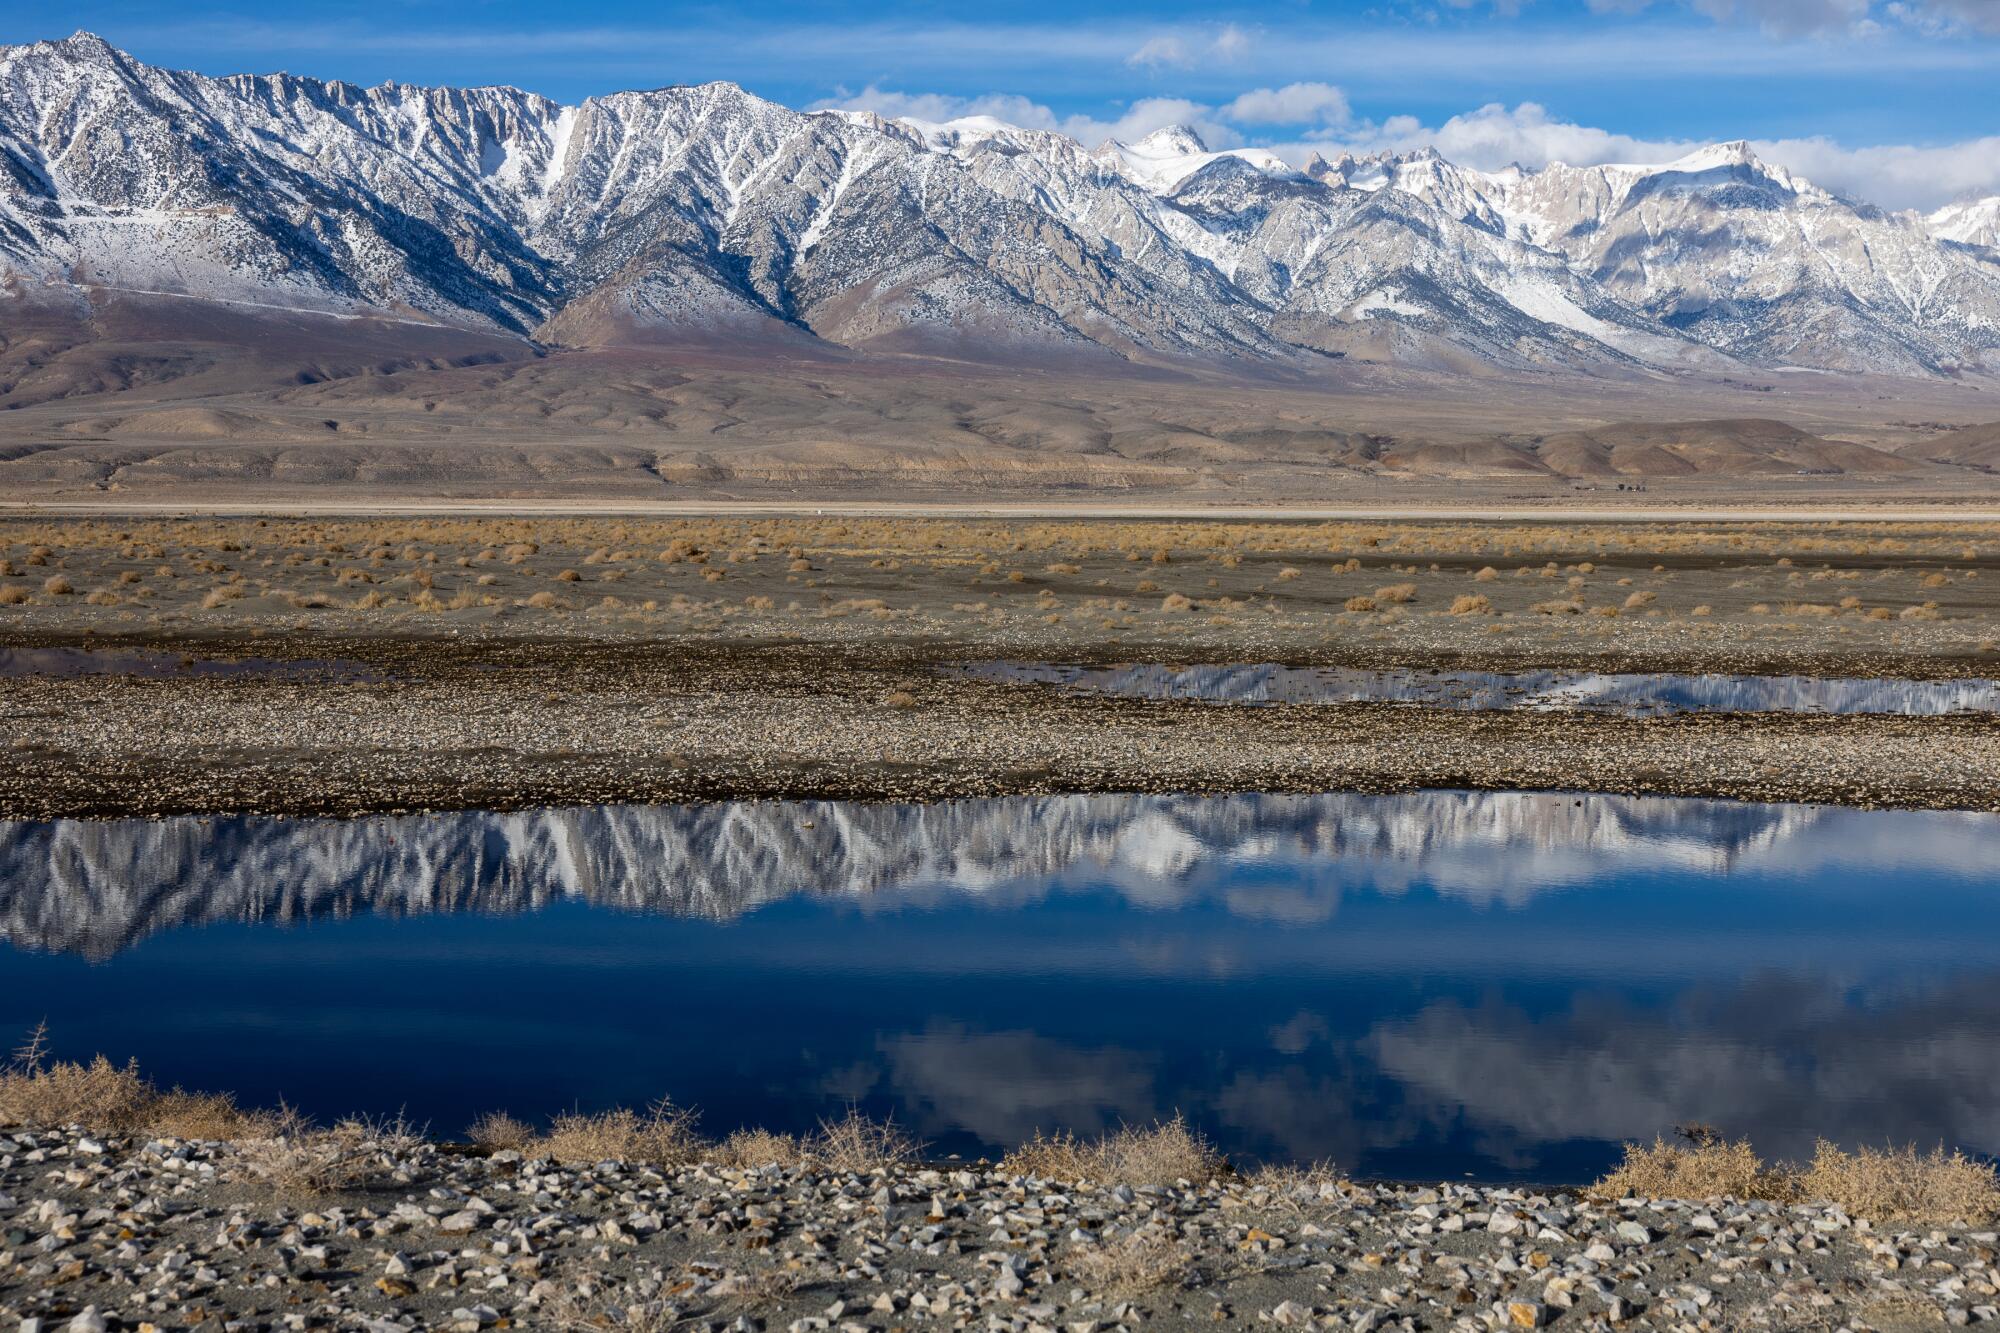 Snow-covered mountains are reflected in a pond